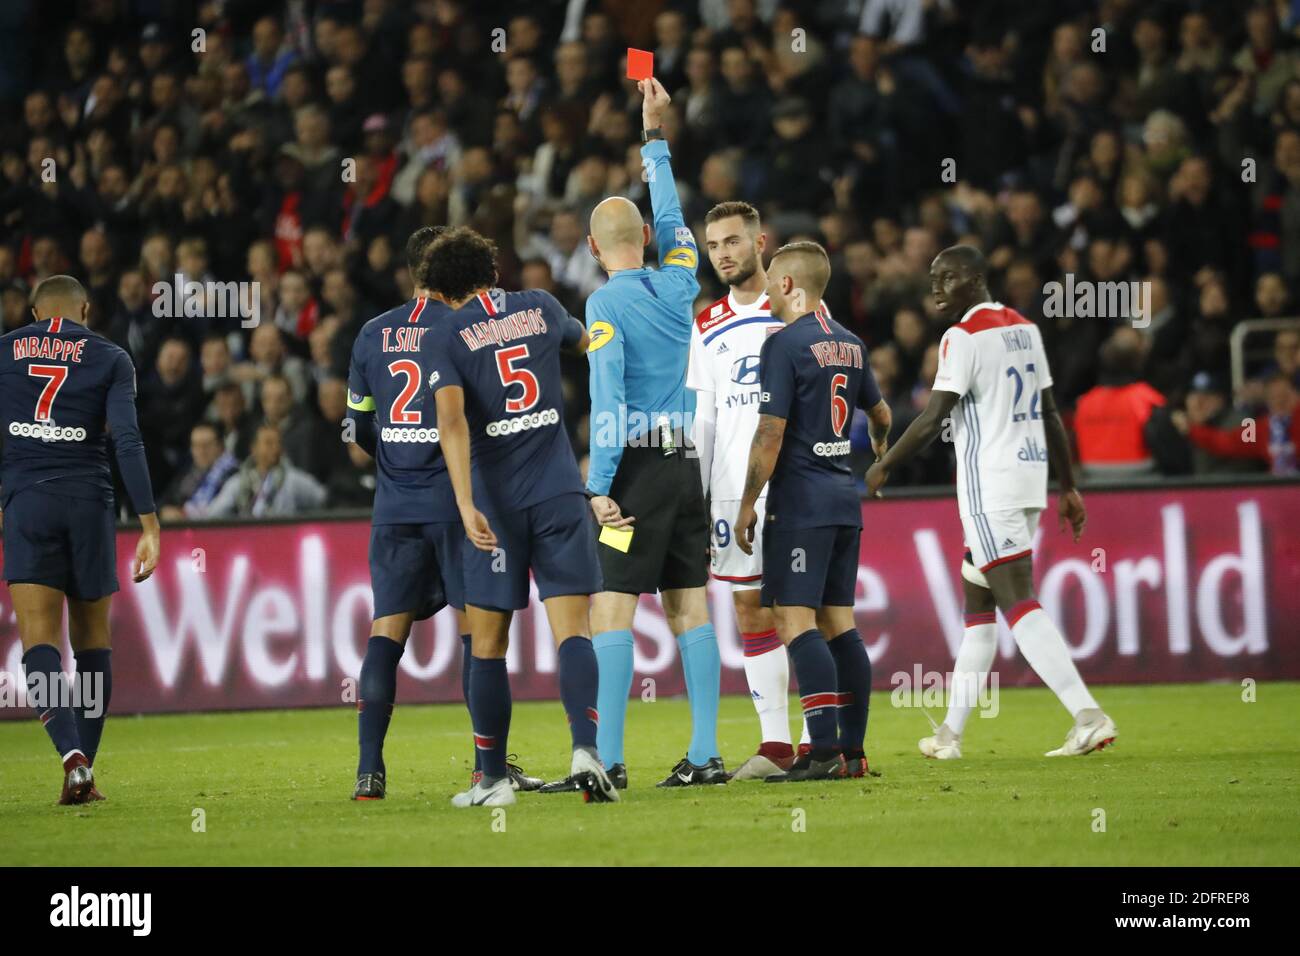 Lyon's Lucas Tousart receiving a red card from referee Abthony Gautier during the Ligue 1 Paris St-Germain (PSG) v Olympique Lyonnais football match at the Parc des Princes stadium in Paris, France on October 7, 2018. Paris Saint-Germain moved eight points clear at the top of Ligue 1 as Kylian Mbappe scored four goals in a 5-0 victory over Lyon. Photo by Henri Szwarc/ABACAPRESS.COM Stock Photo